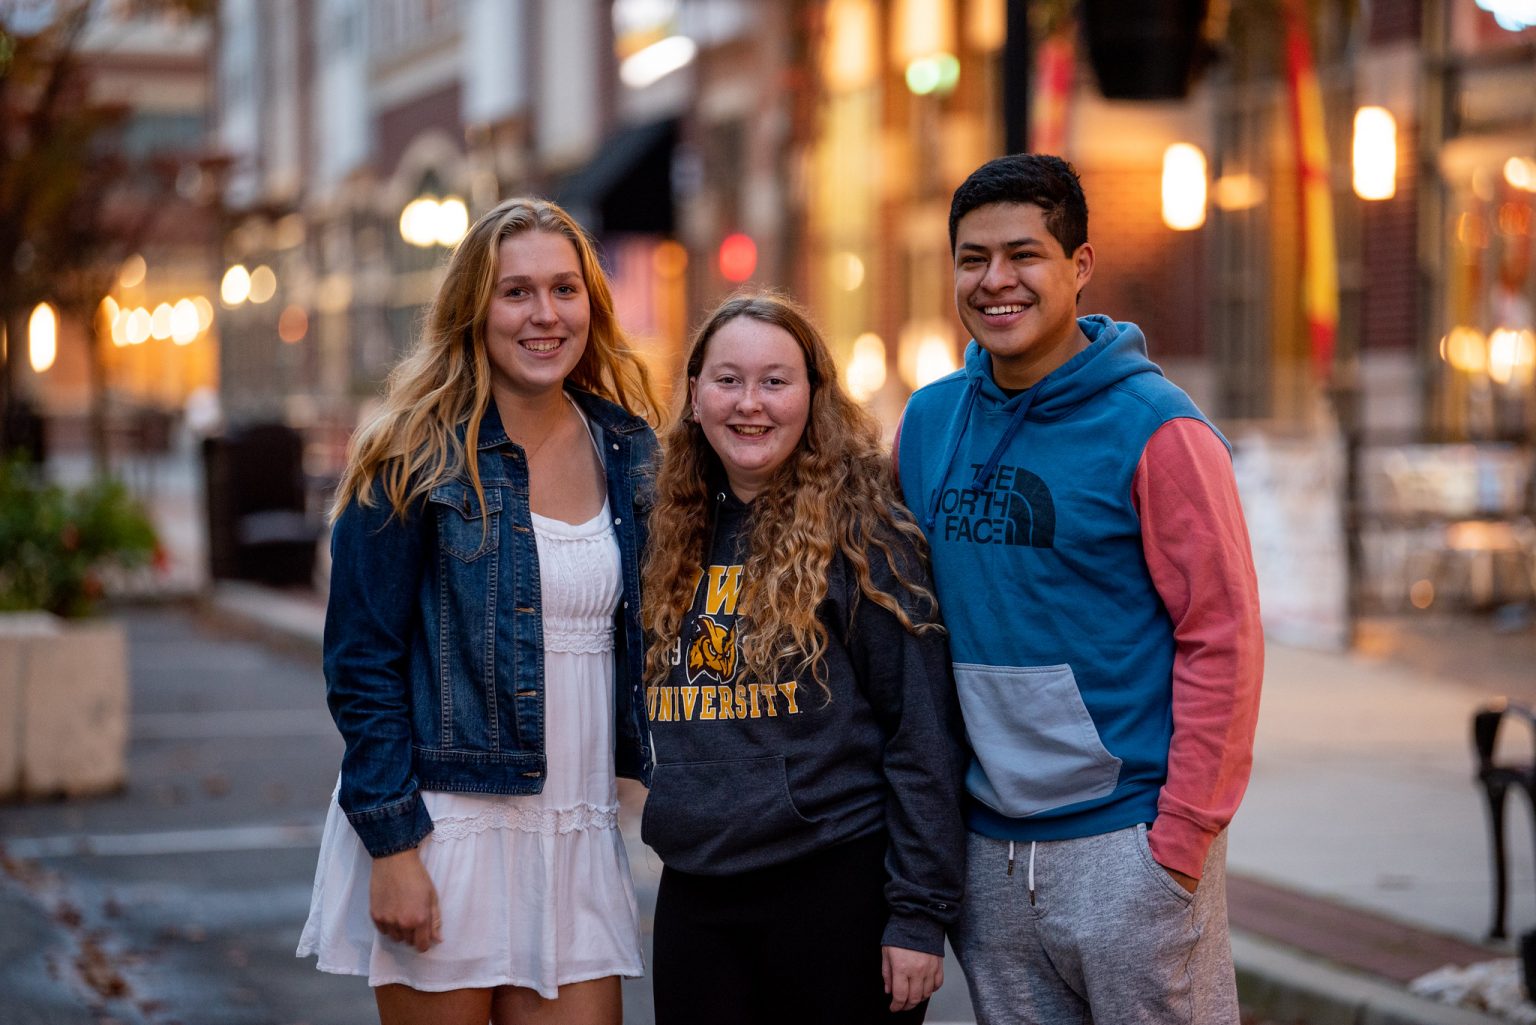 Three students, Taylor in the middle, posing on Rowan Boulevard.